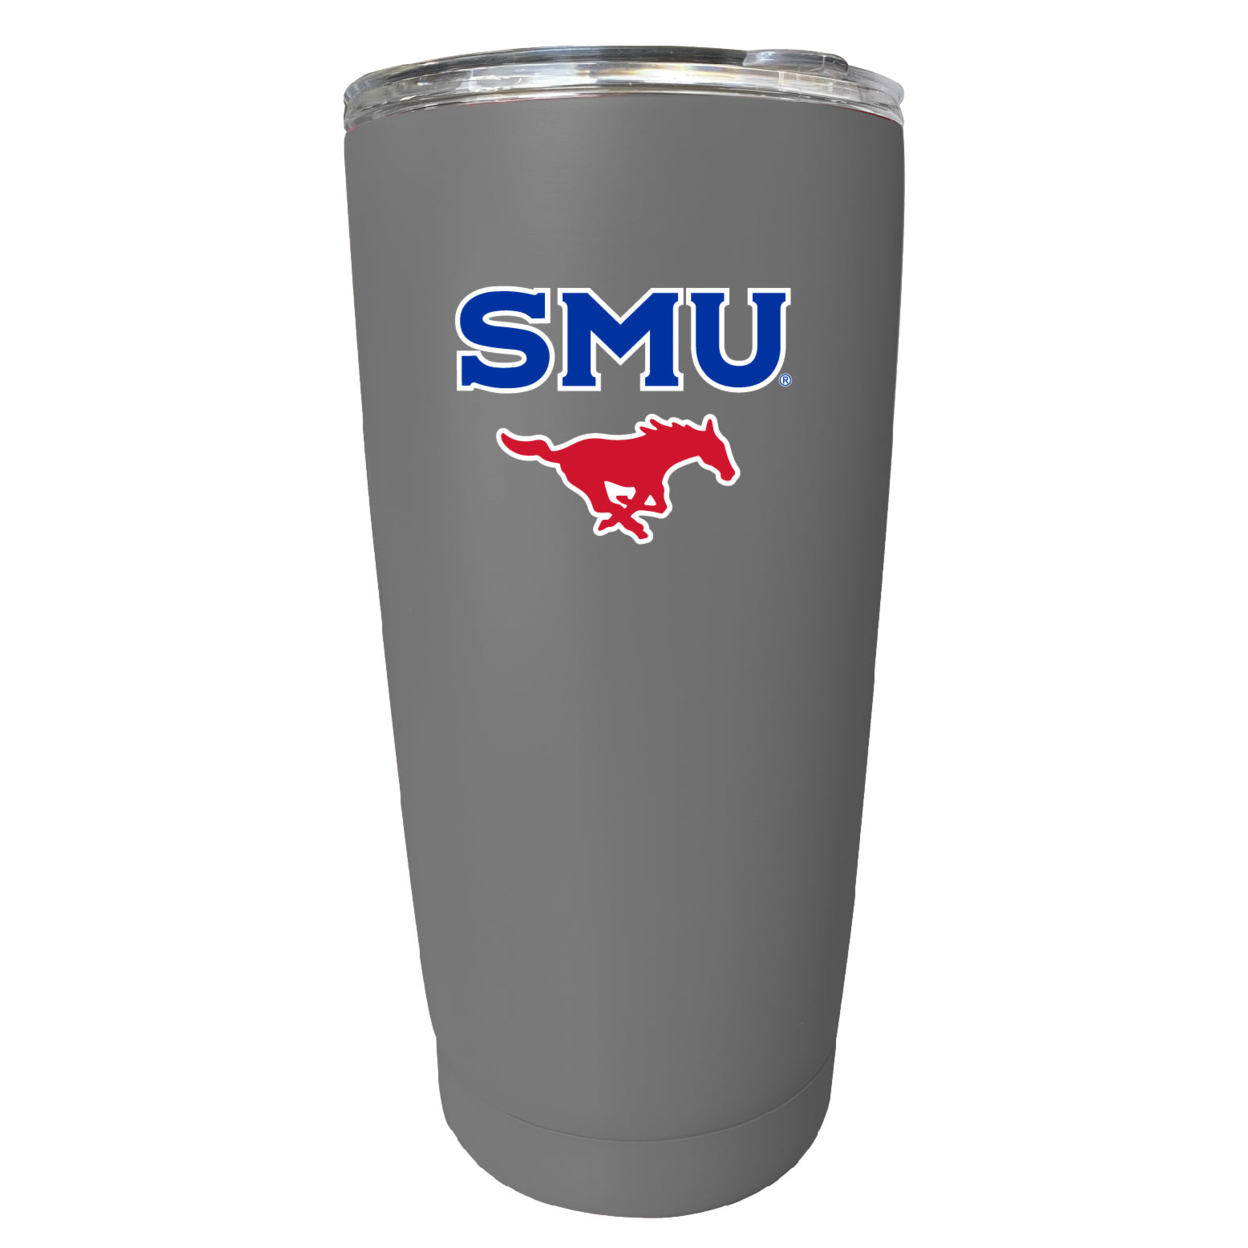 Southern Methodist University 16 Oz Stainless Steel Insulated Tumbler - Gray